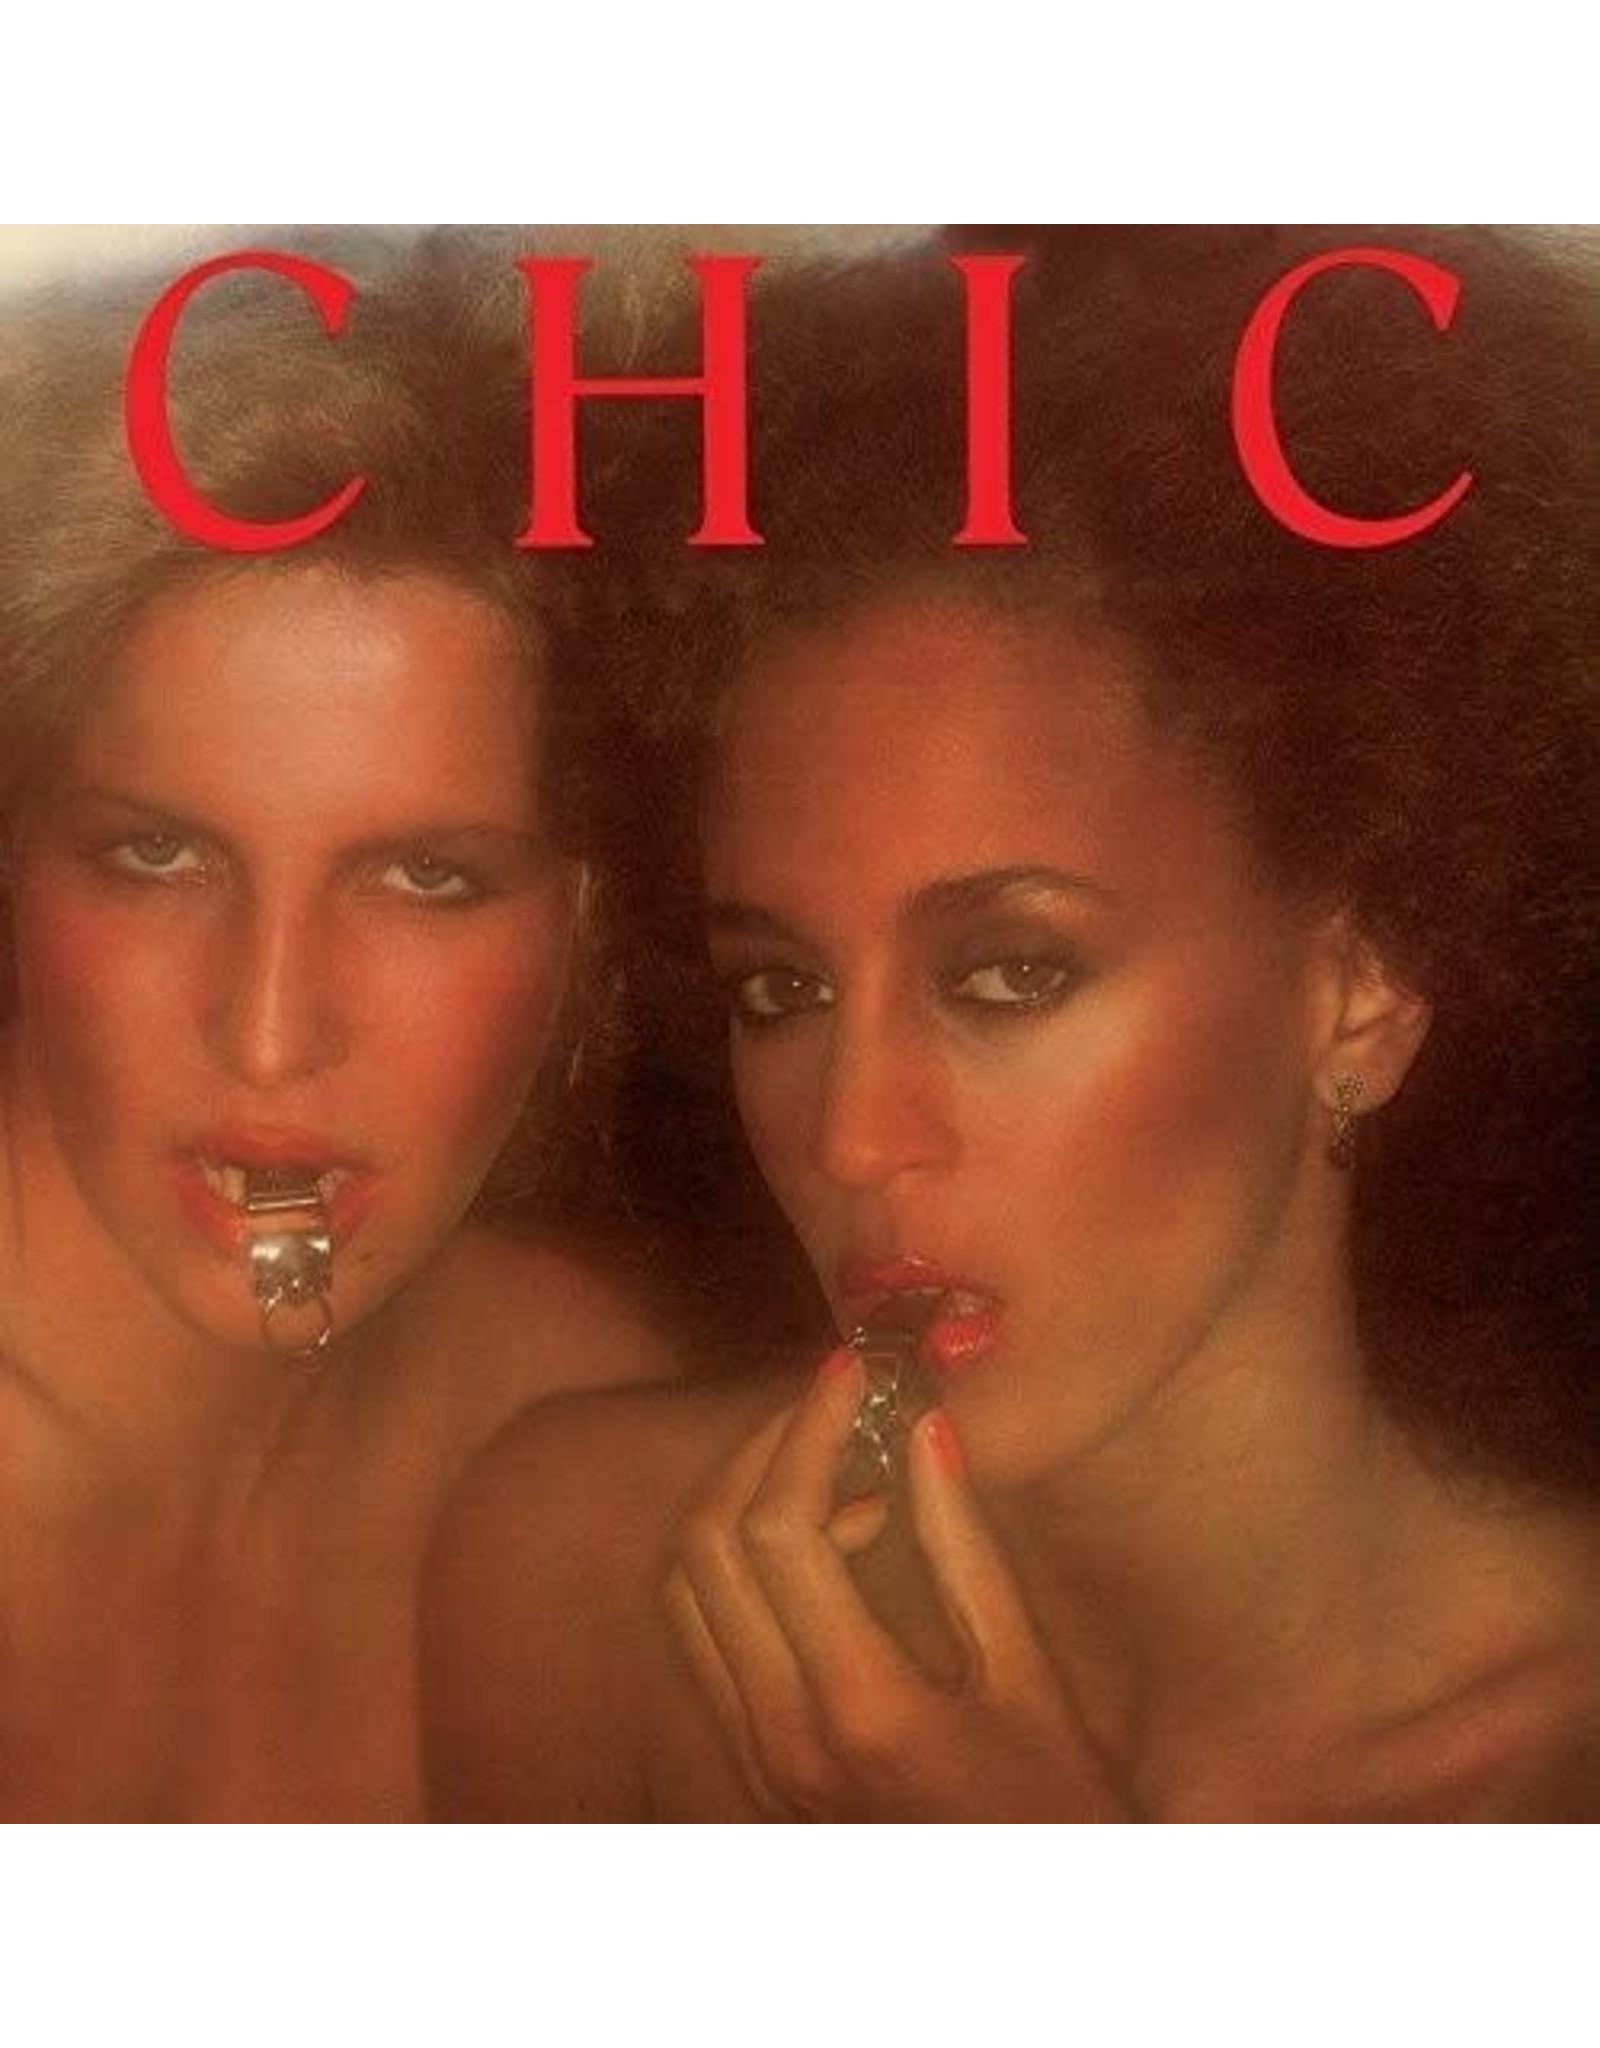 New Vinyl Chic -  S/T (180g, Limited Edition, Anniversary Edition) LP